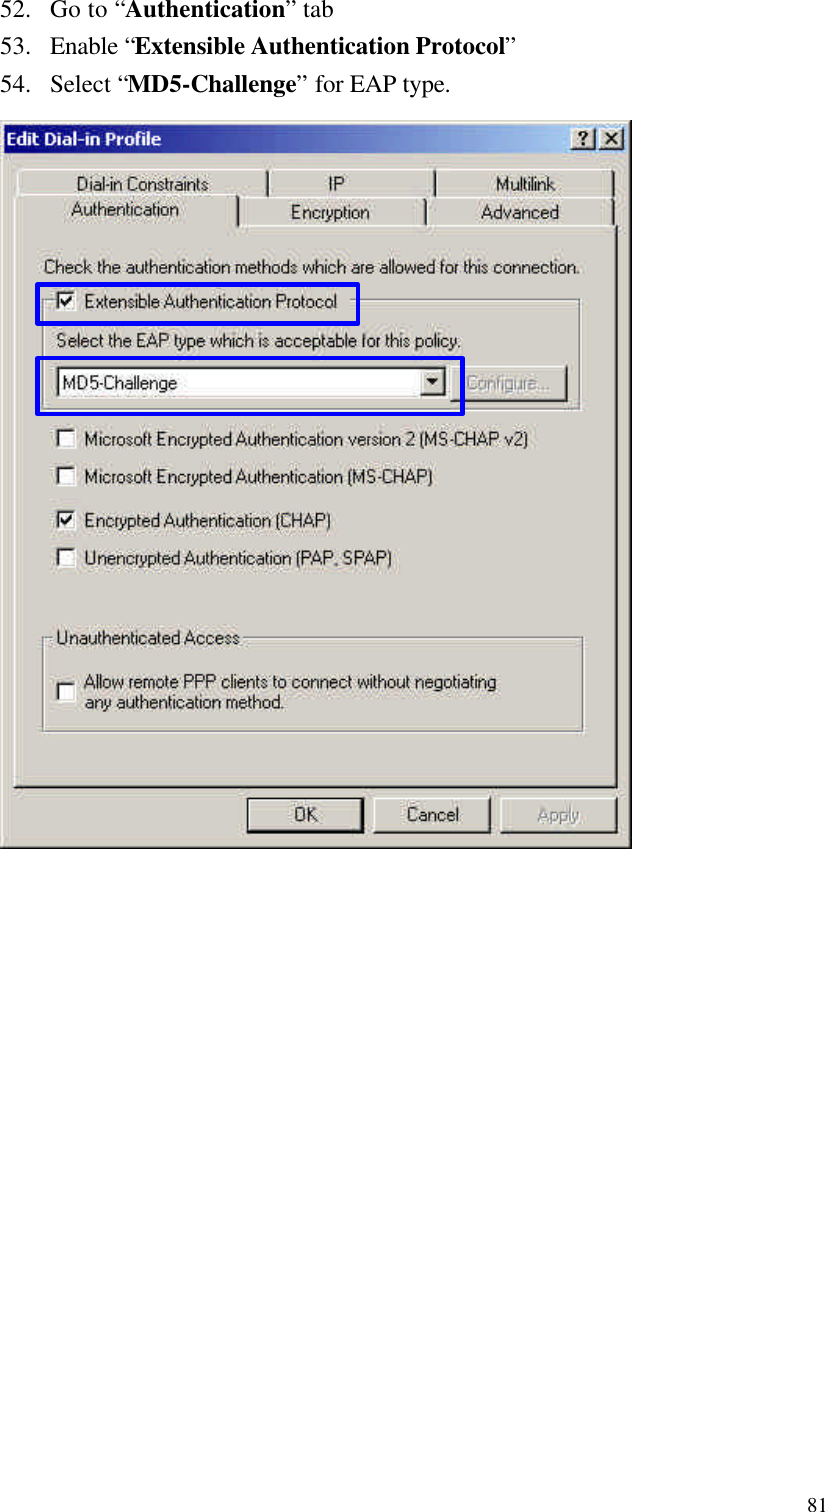  8152. Go to “Authentication” tab 53. Enable “Extensible Authentication Protocol” 54. Select “MD5-Challenge” for EAP type.                         